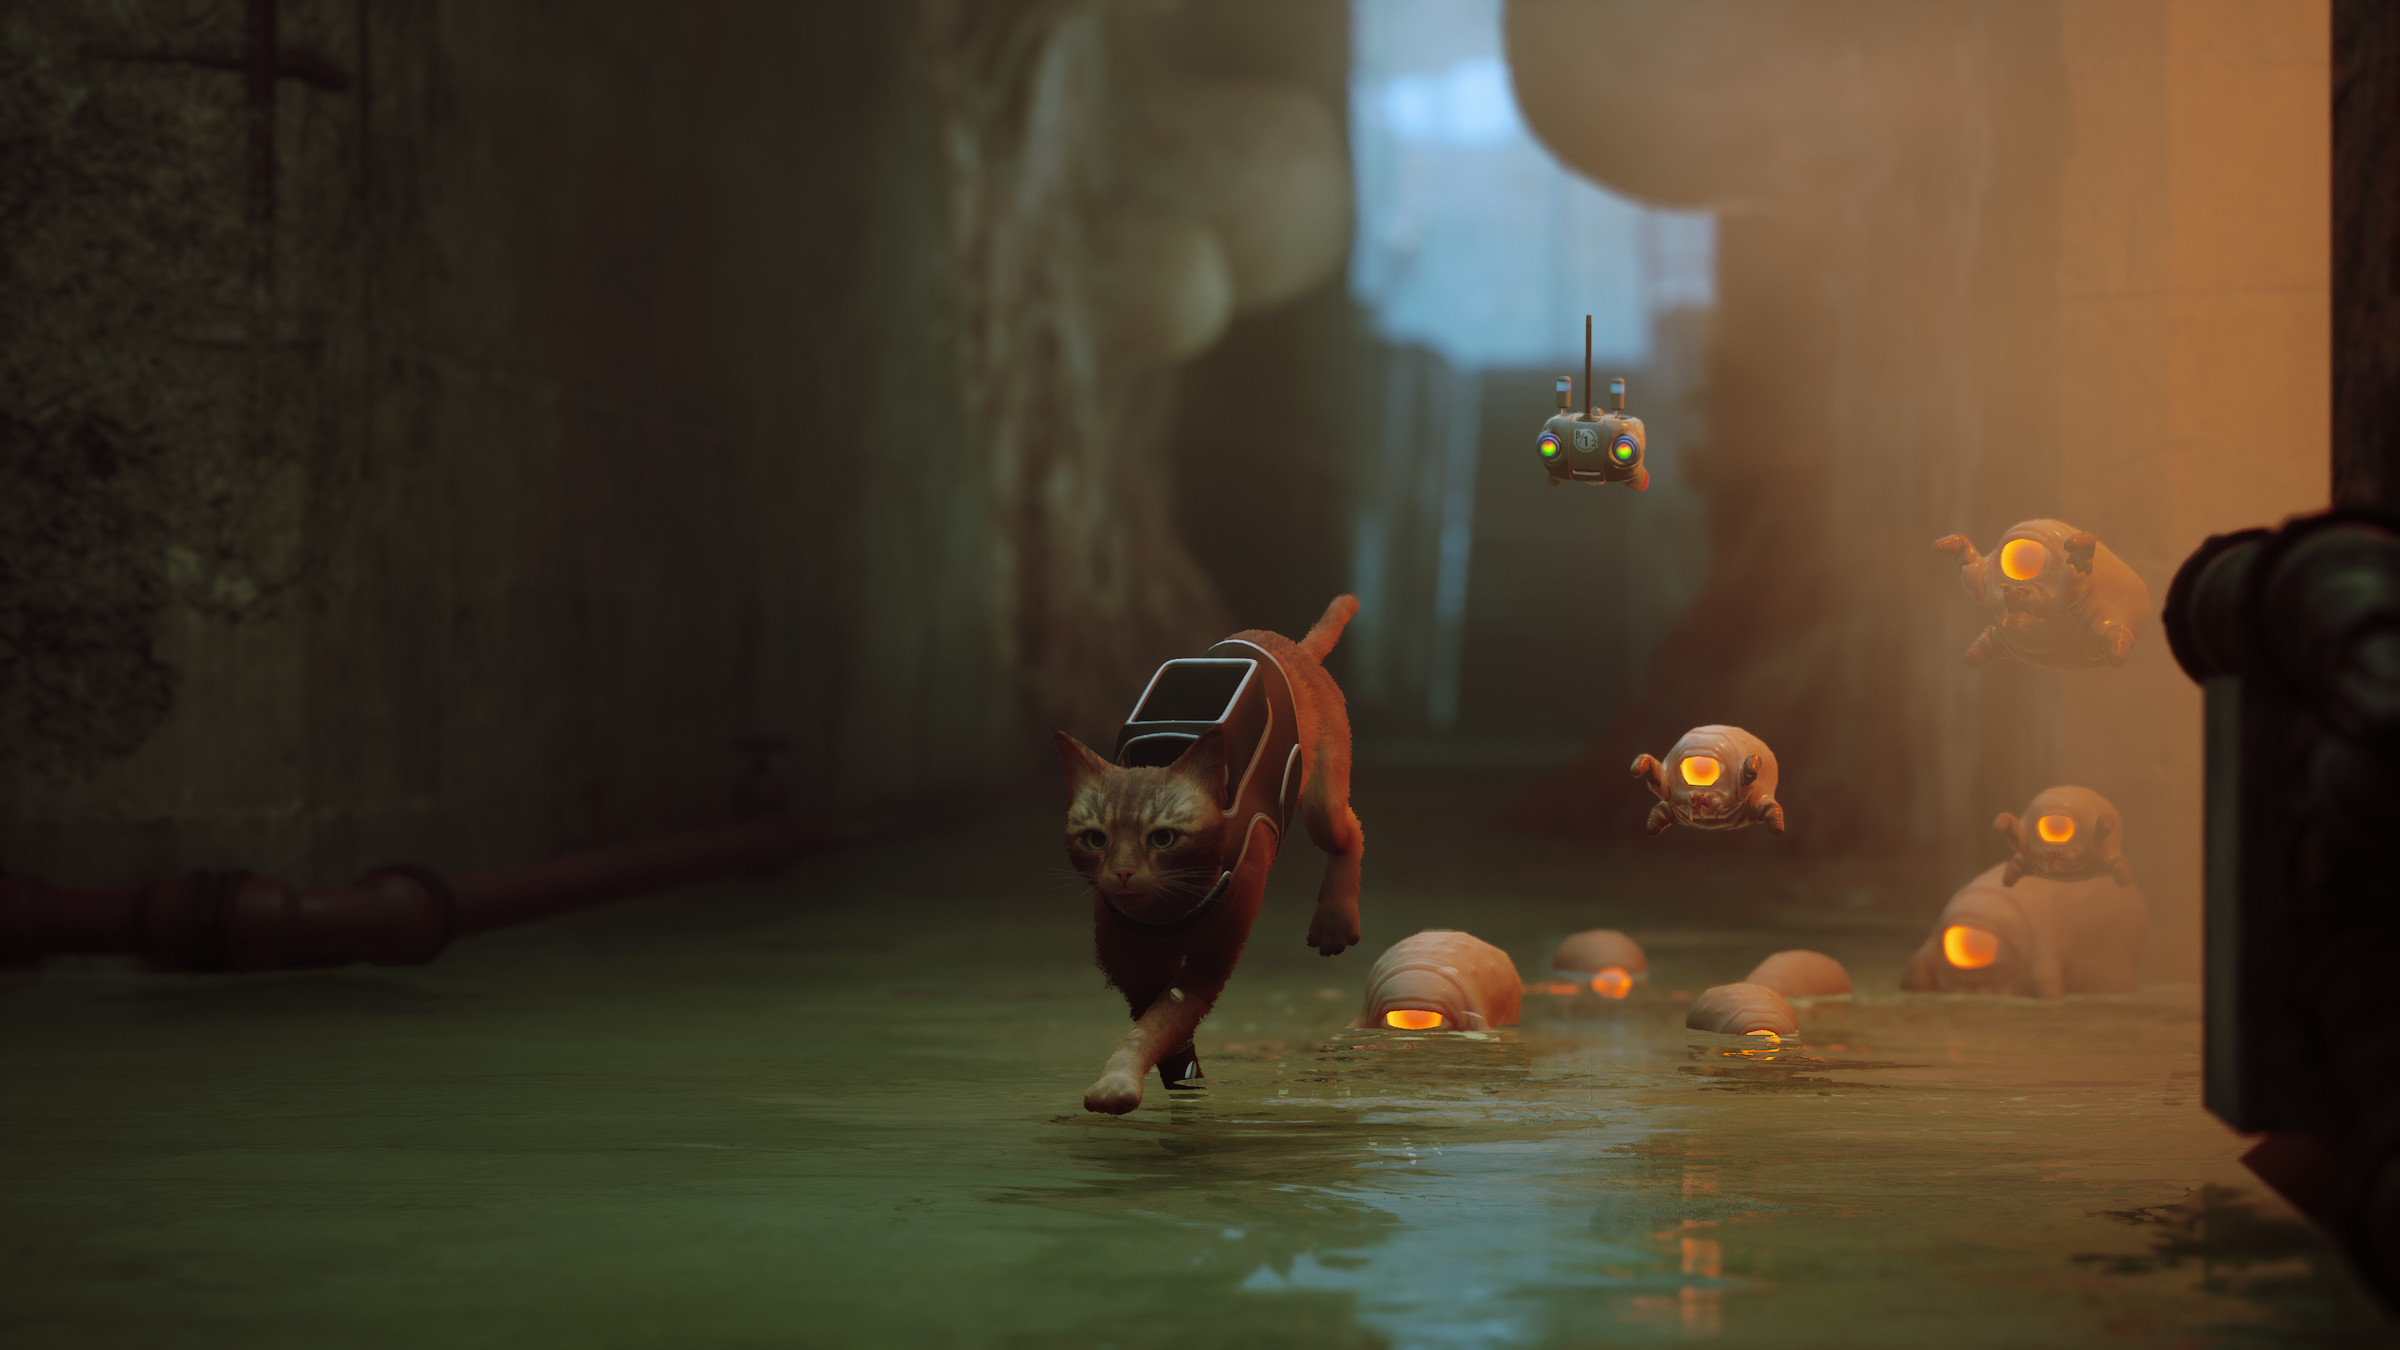 In the game Stray, a cat runs away from one-eyed aliens in a water cave.